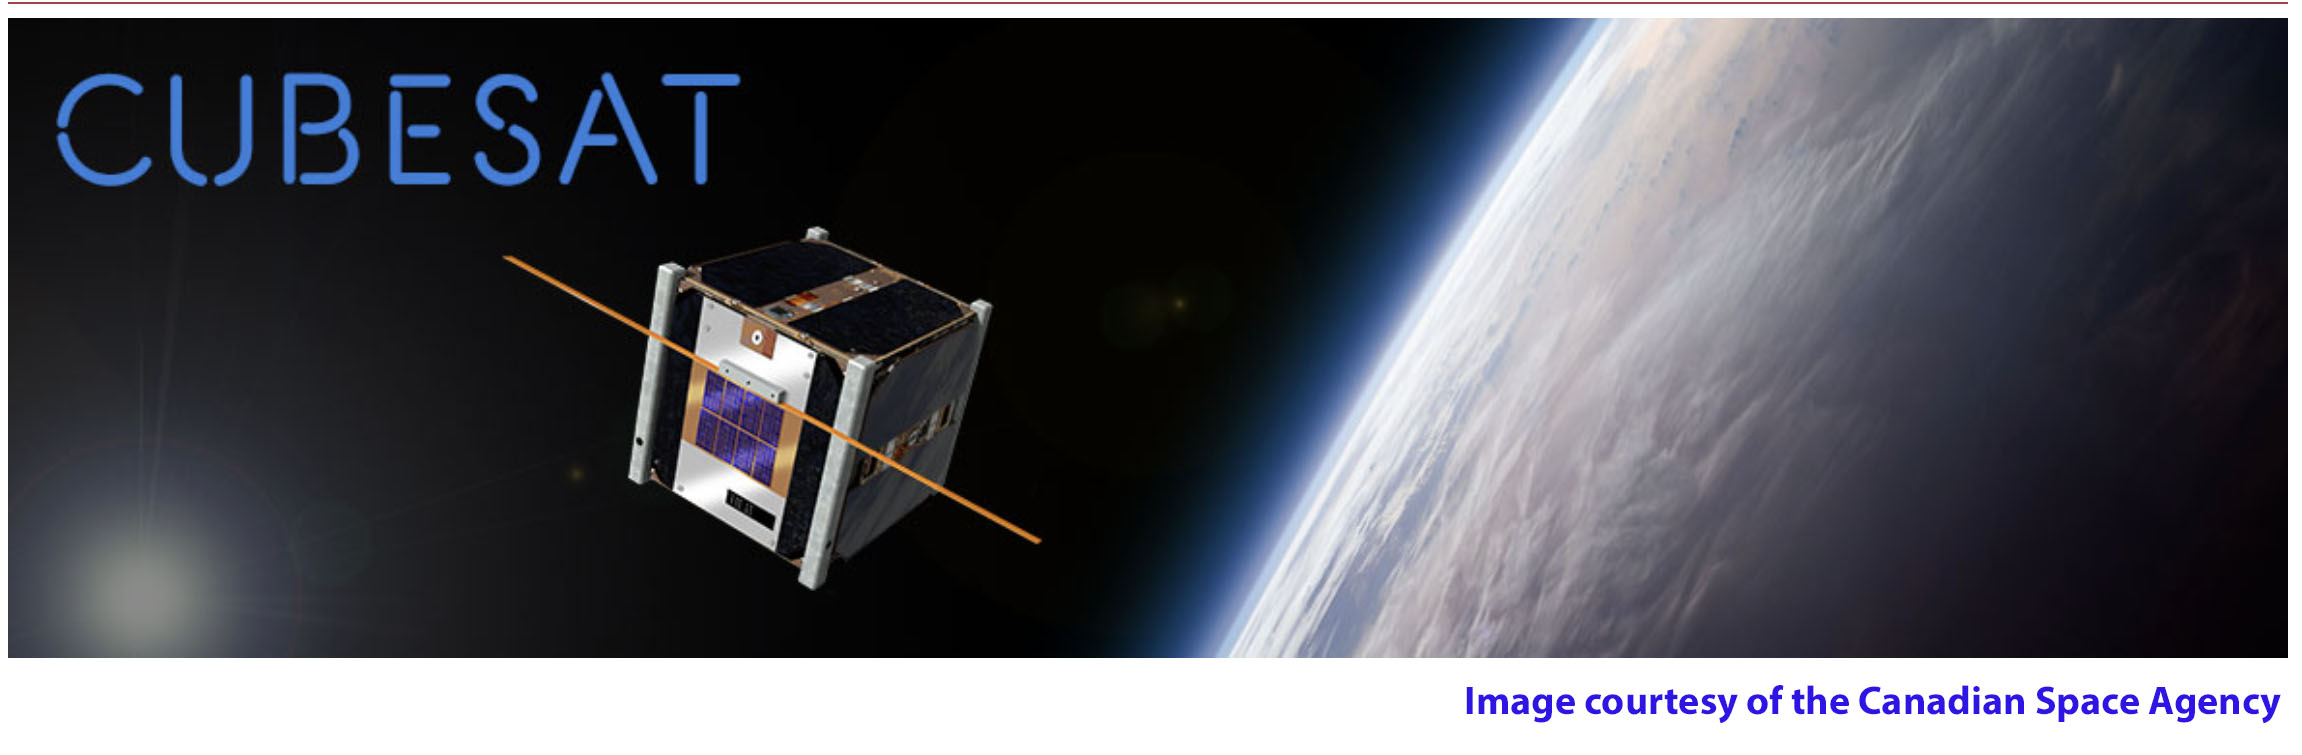 Cubesat image courtesy of the Canadian Space Agency